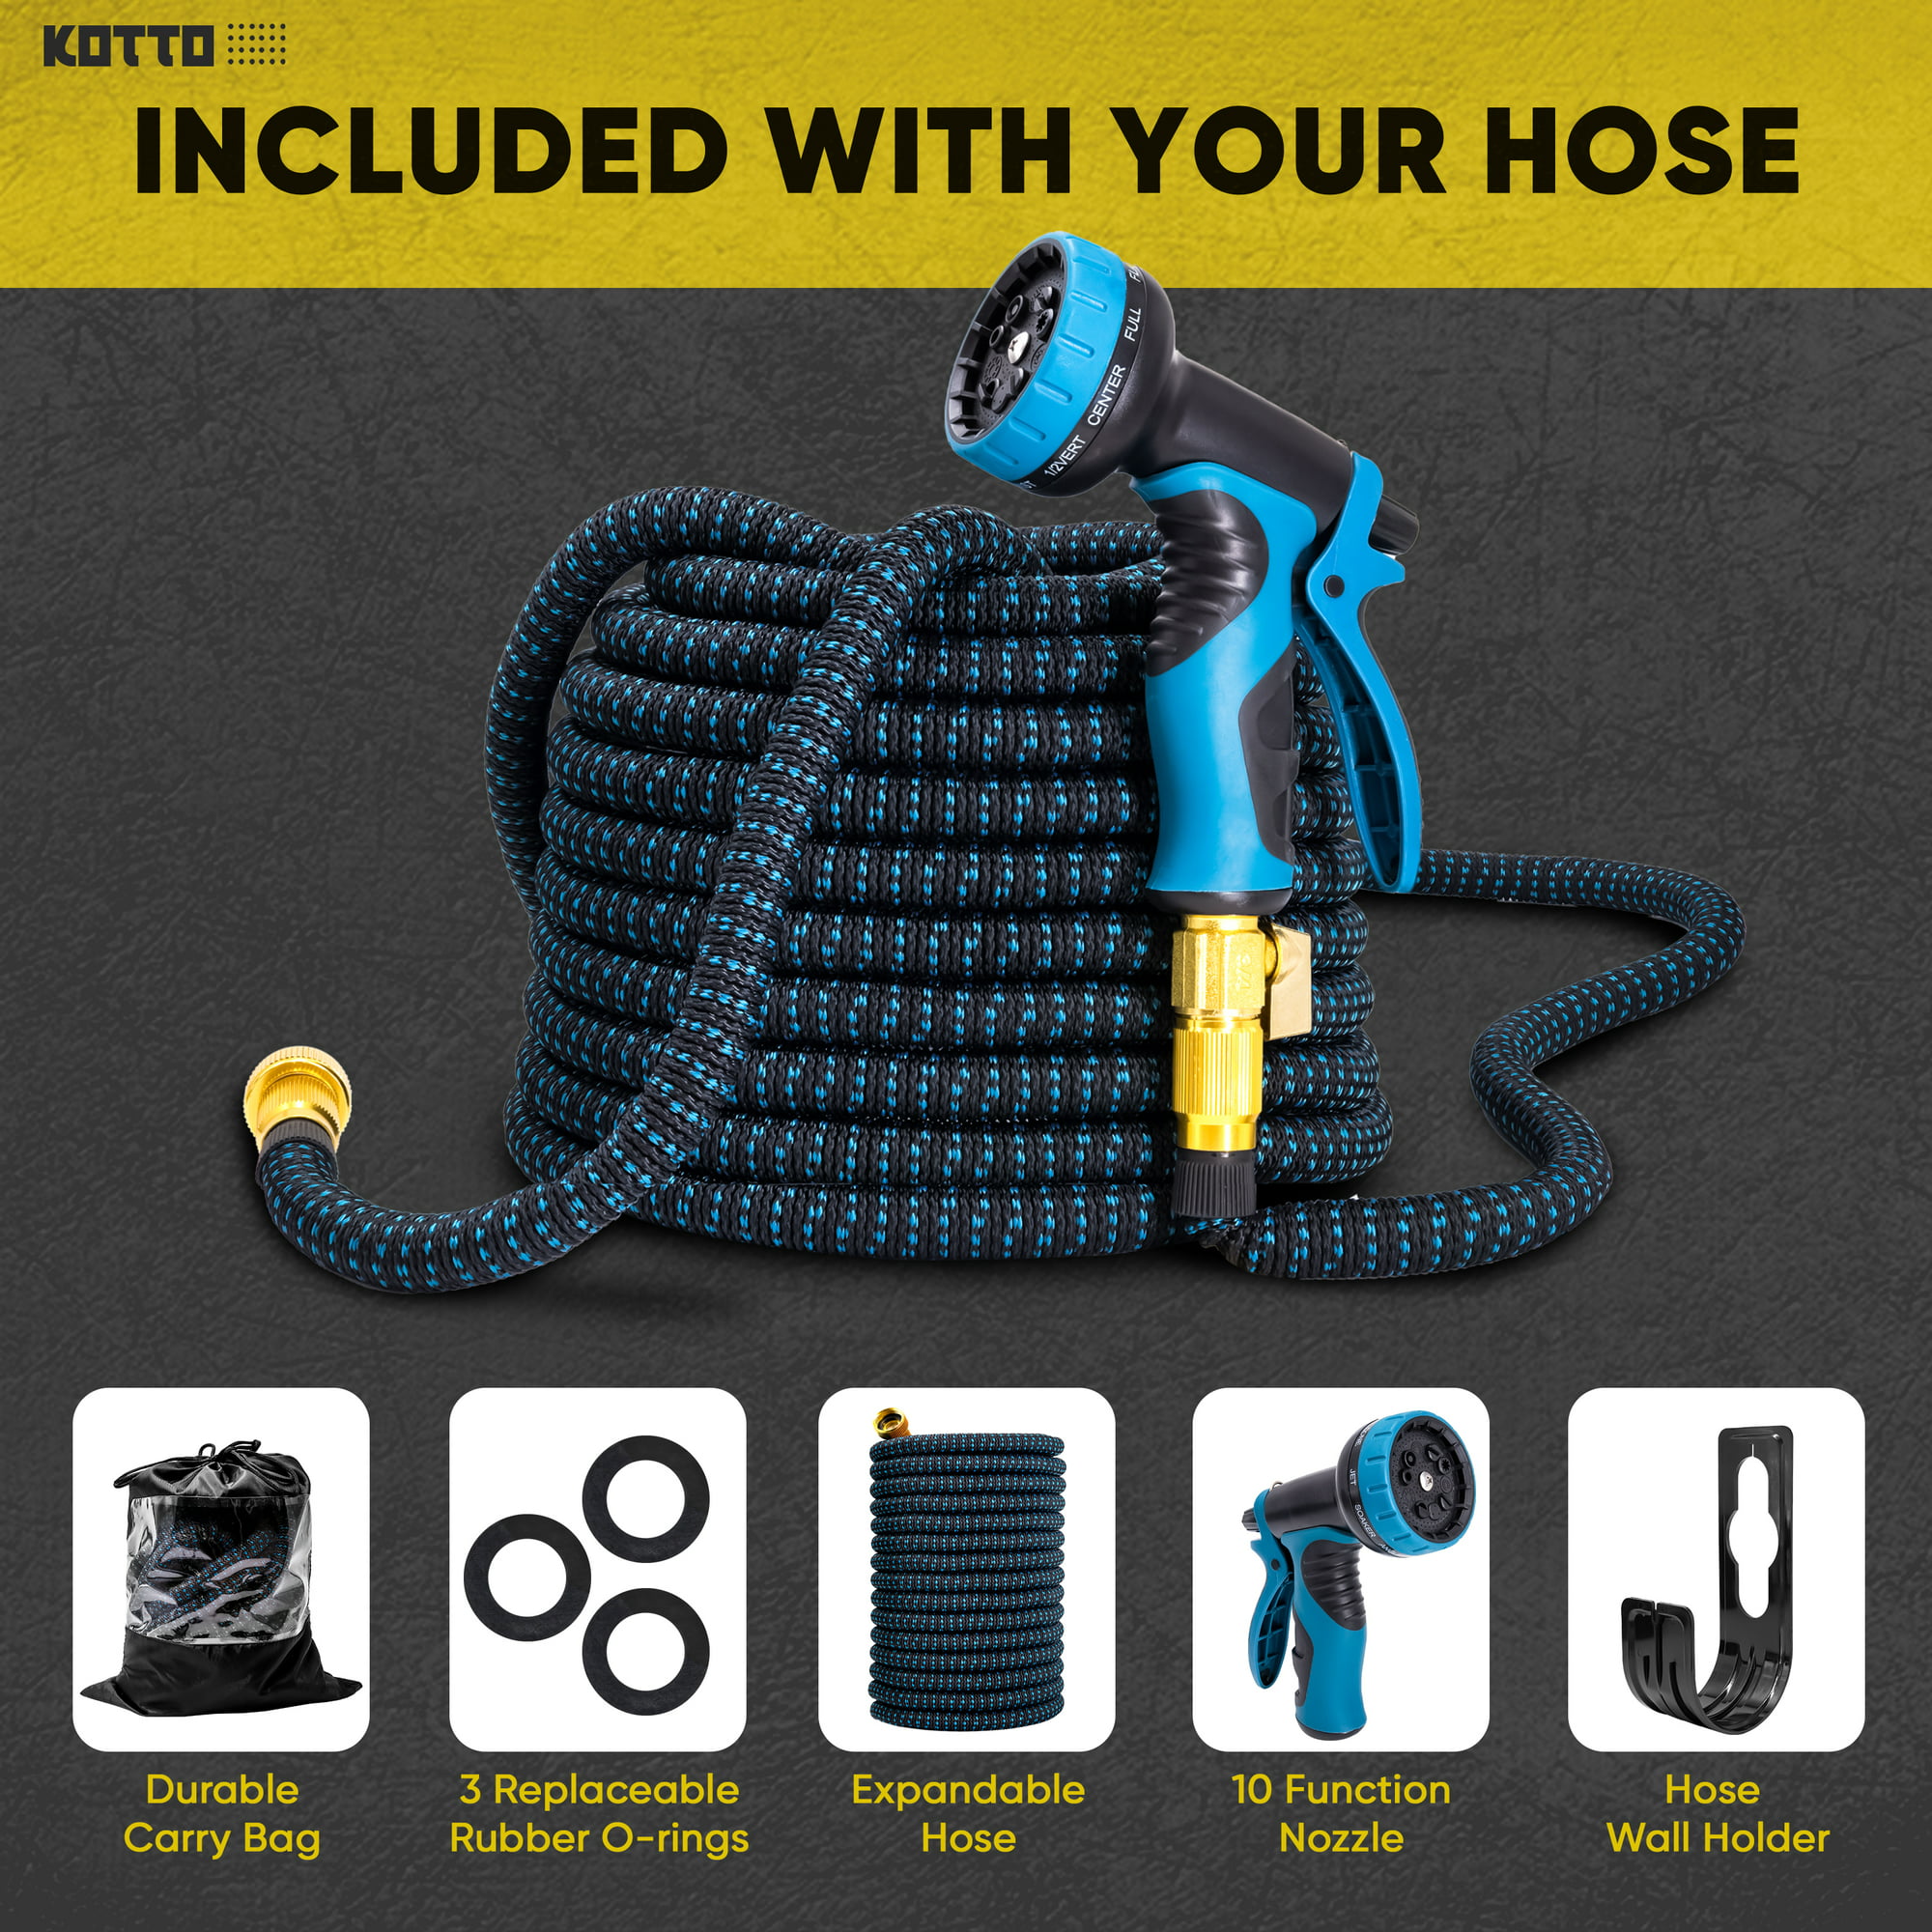 Kotto Expandable Garden Hose, Water Hose for Outside with 10 Spray Nozzles, Hose Holder, Multi-Purpose Anti-Rust Solid Brass Connector, Leak-Proof Design, Blue, 150 ft - image 3 of 8